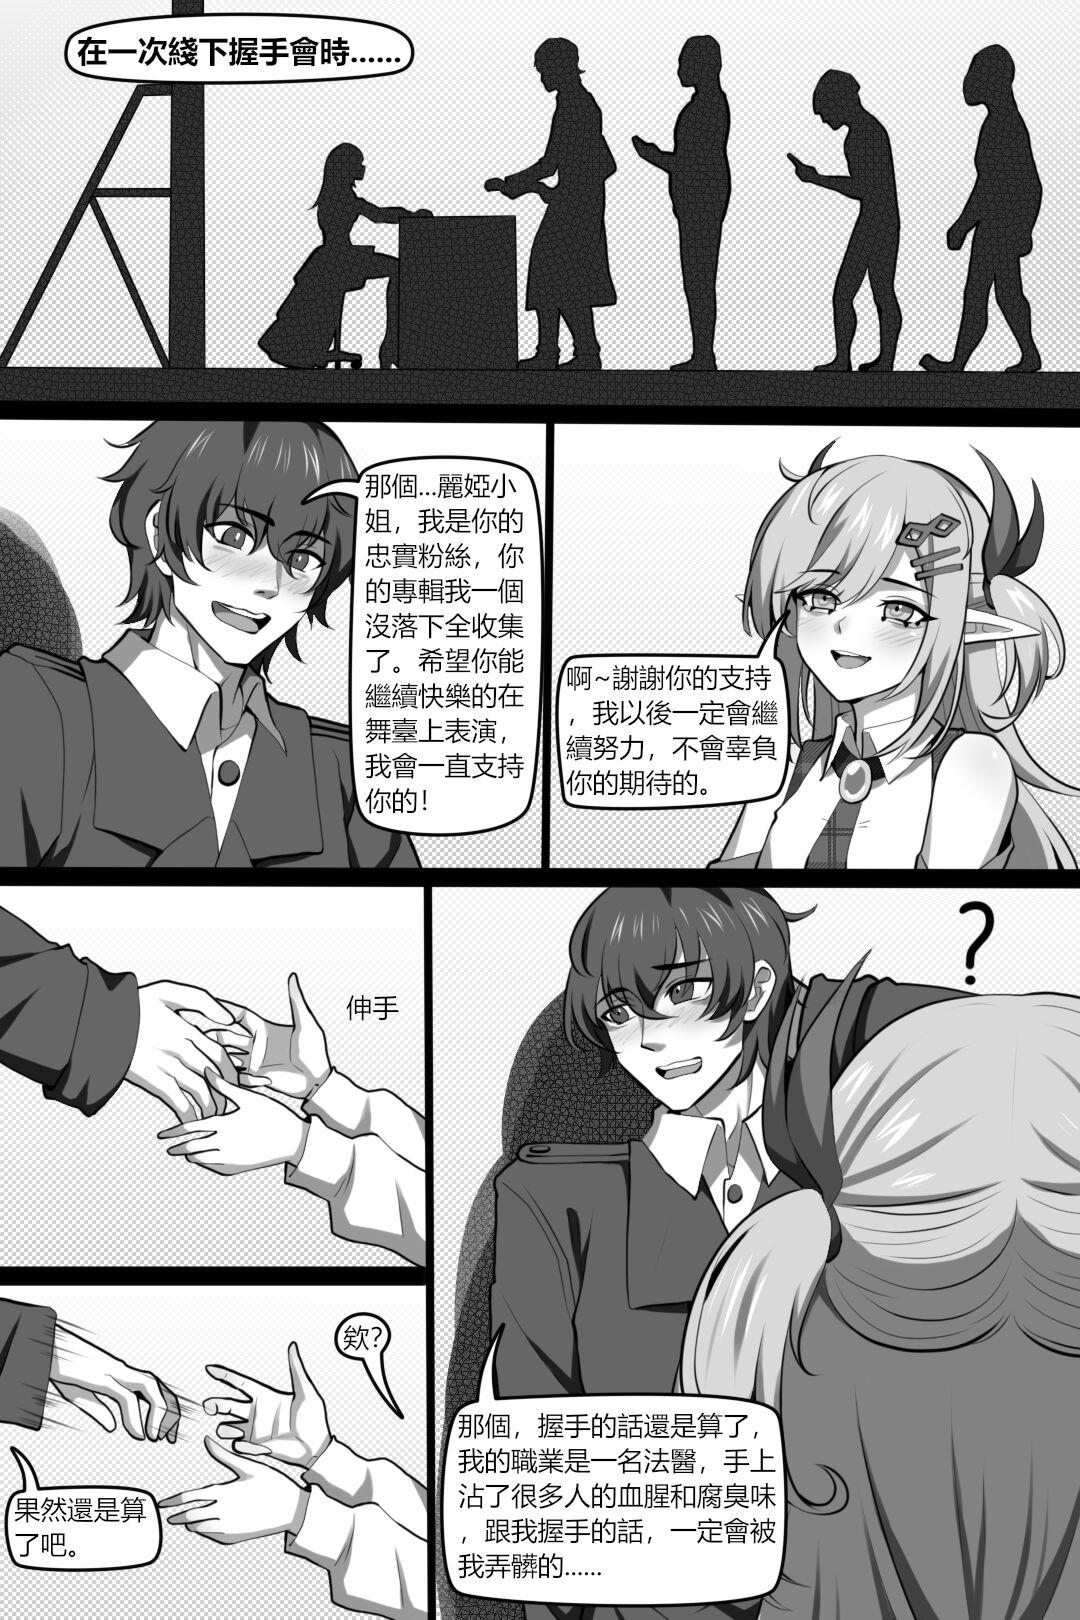 Puta Bin Lian City Stories Chapter 3: Corrupted Forensic - Original Leather - Page 5